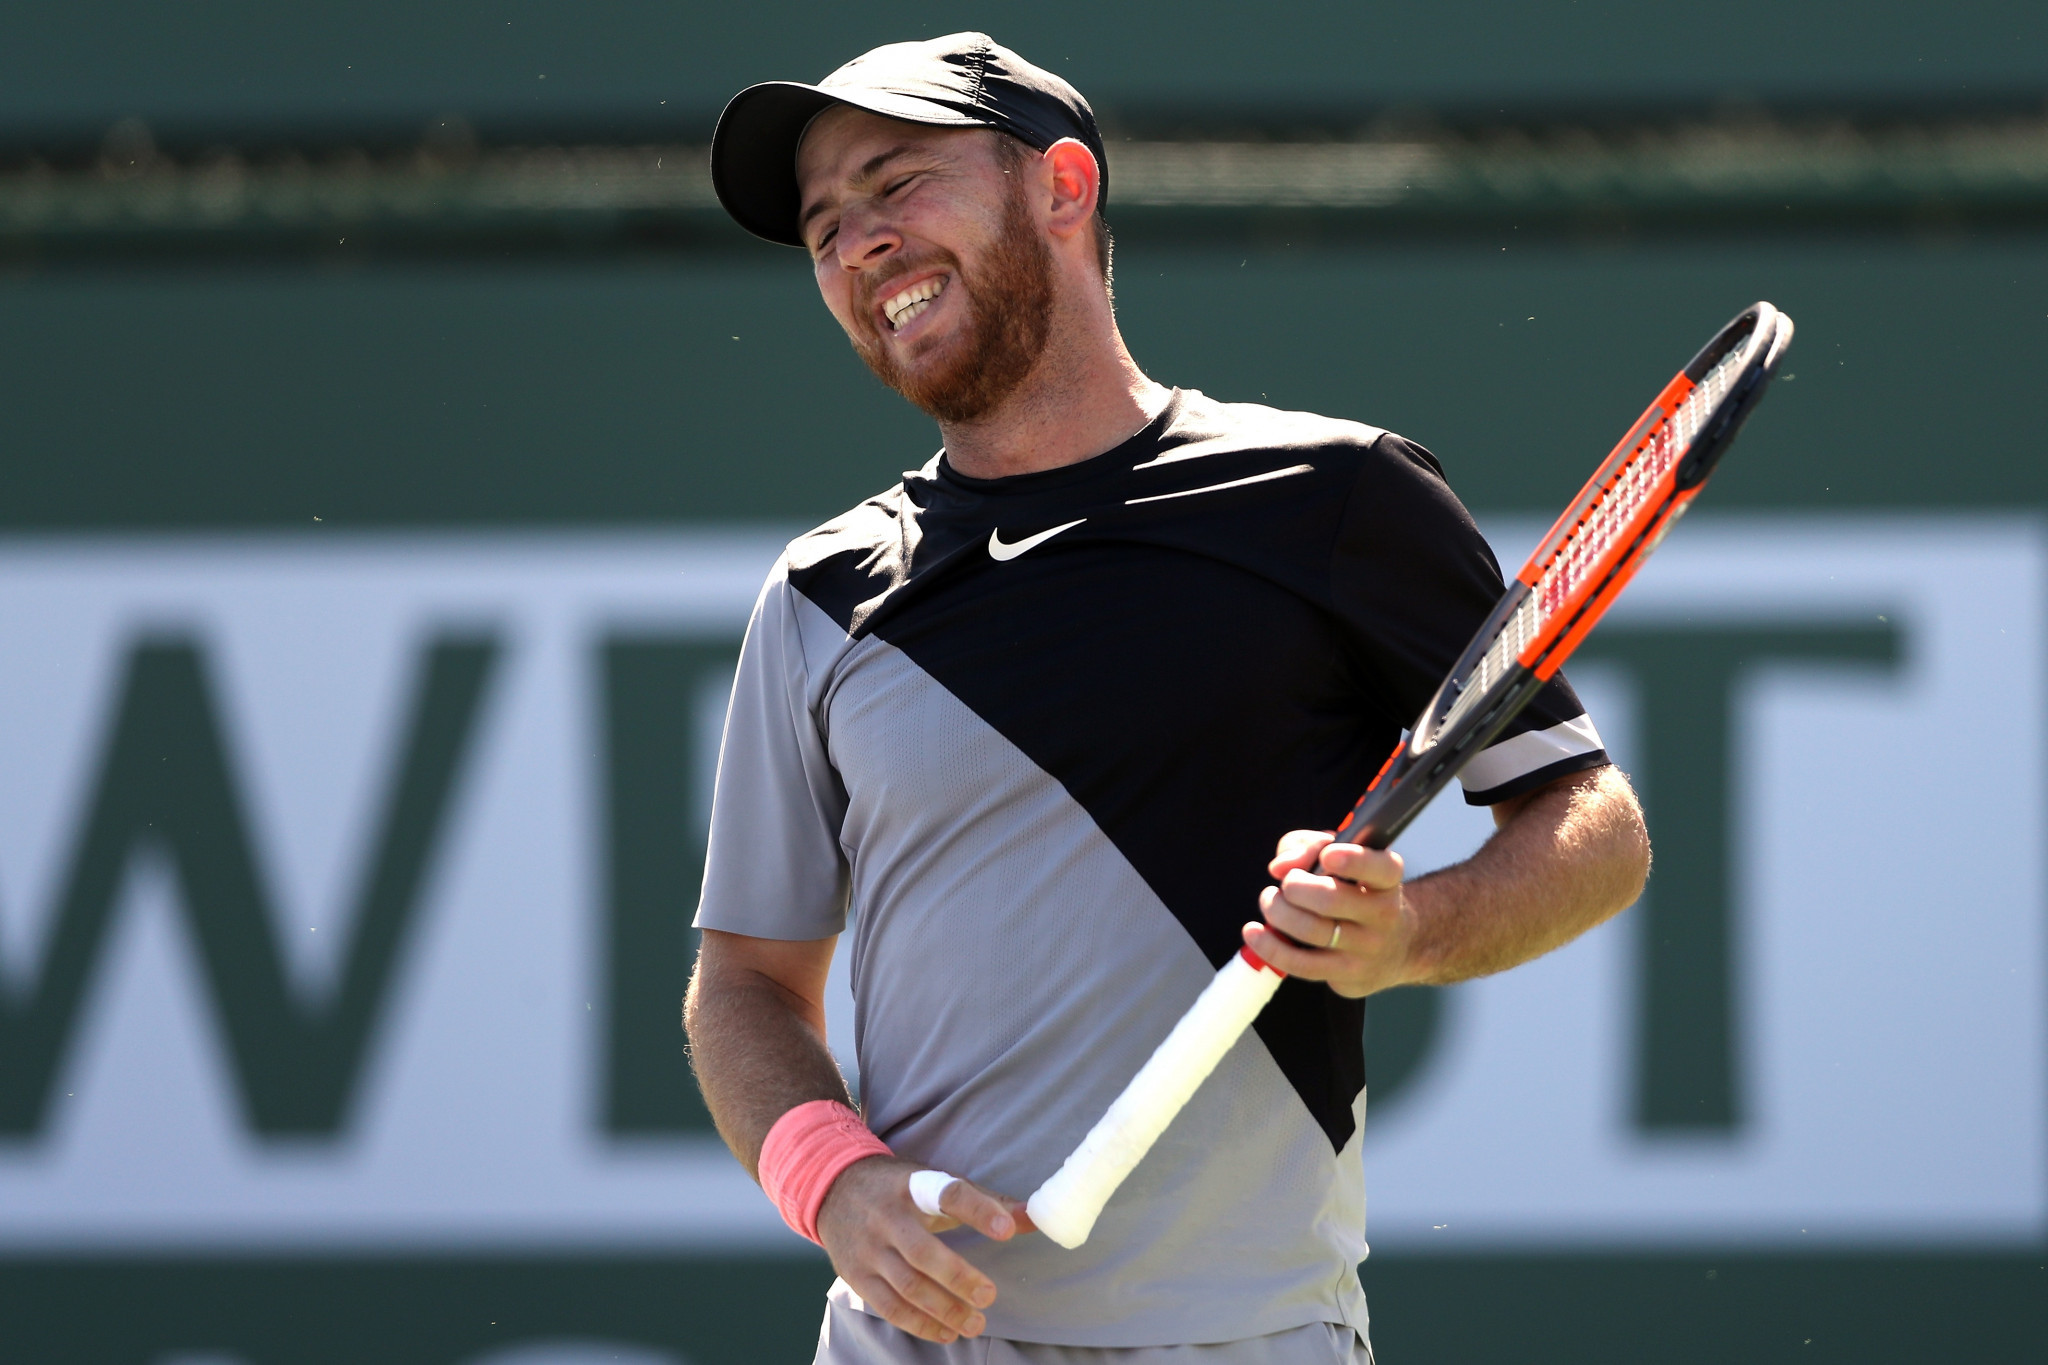 Dudi Sela has dismissed claims that he was involved in match fixing after his first-round qualification tie reportedly flagged an abnormally high number of bets ©Getty Images